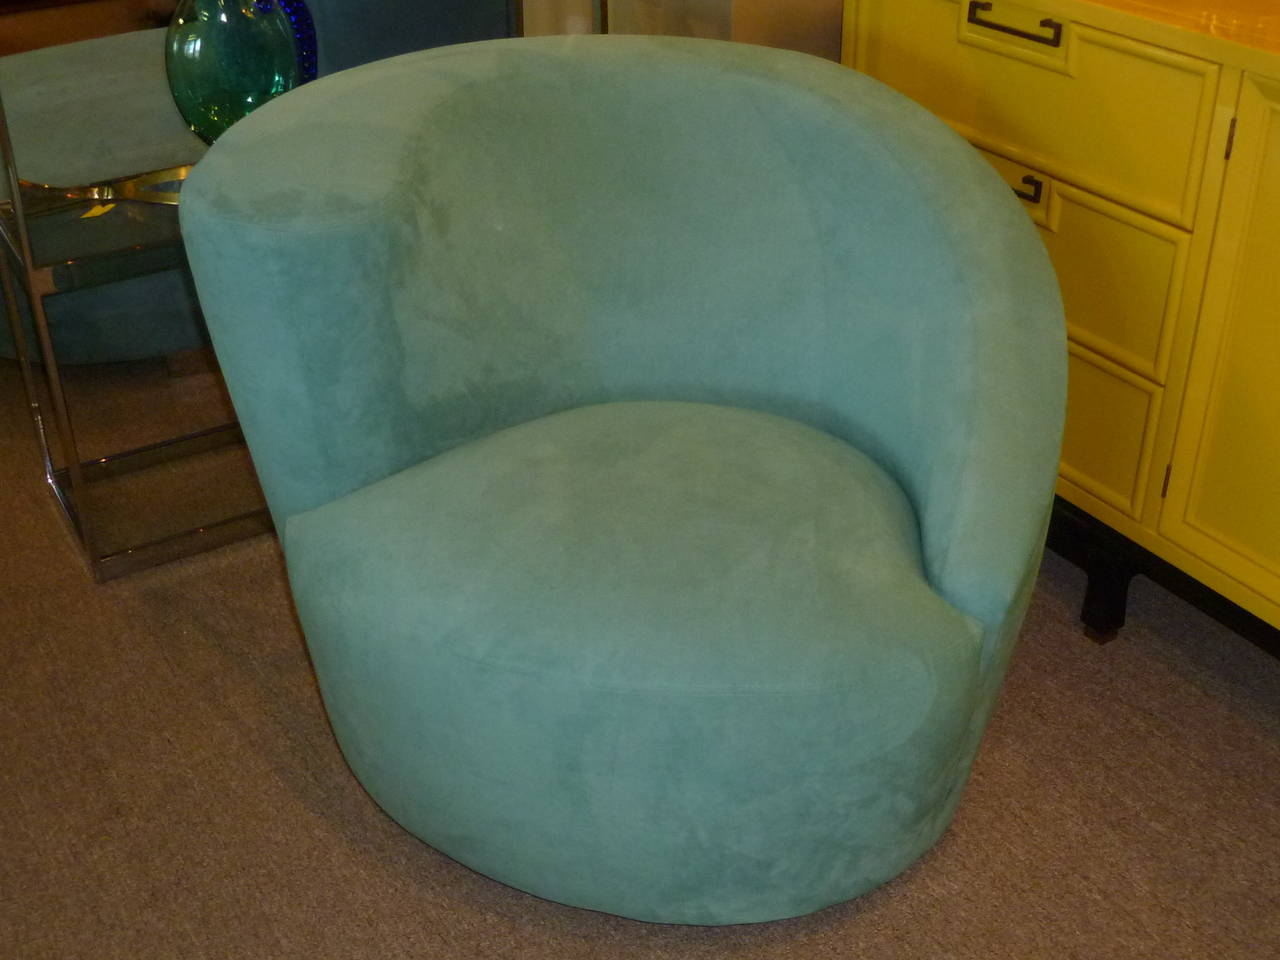 SOLD In teal blue ultra suede, a nautilus chair by Vladimir Kagan for Directional. In excellent condition, no issues. Turns 180 degrees in each direction on a upholstered circular swivel base and returning to the original position. Very comfortable